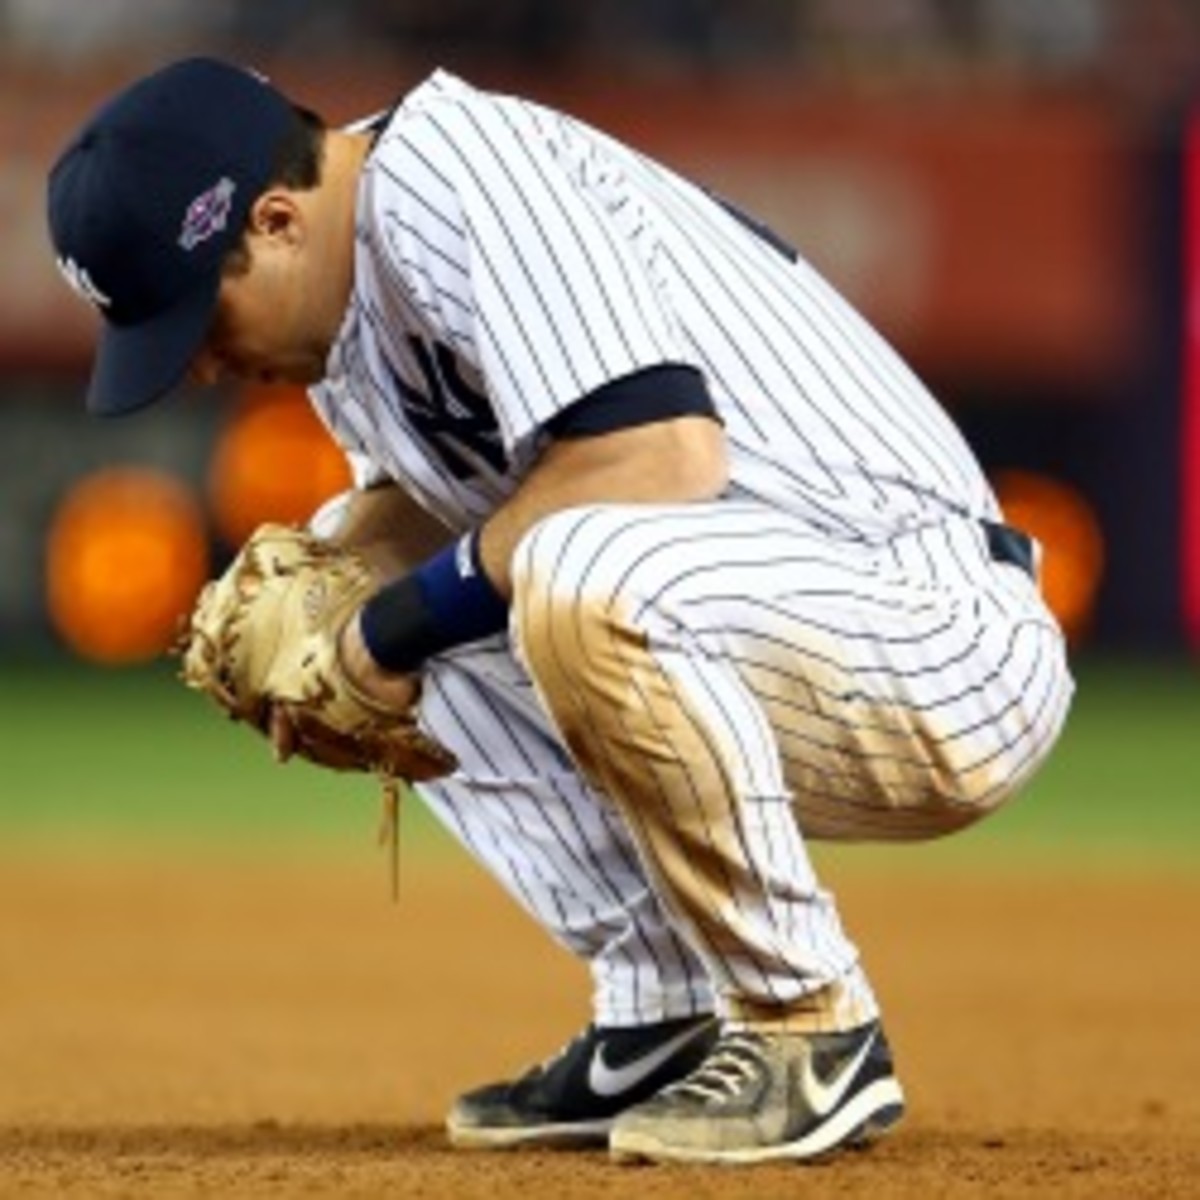 Mark Teixeira admitted Sunday that his wrist injury is worse than the Yankees initially indicated. (Elsa/Getty Images)